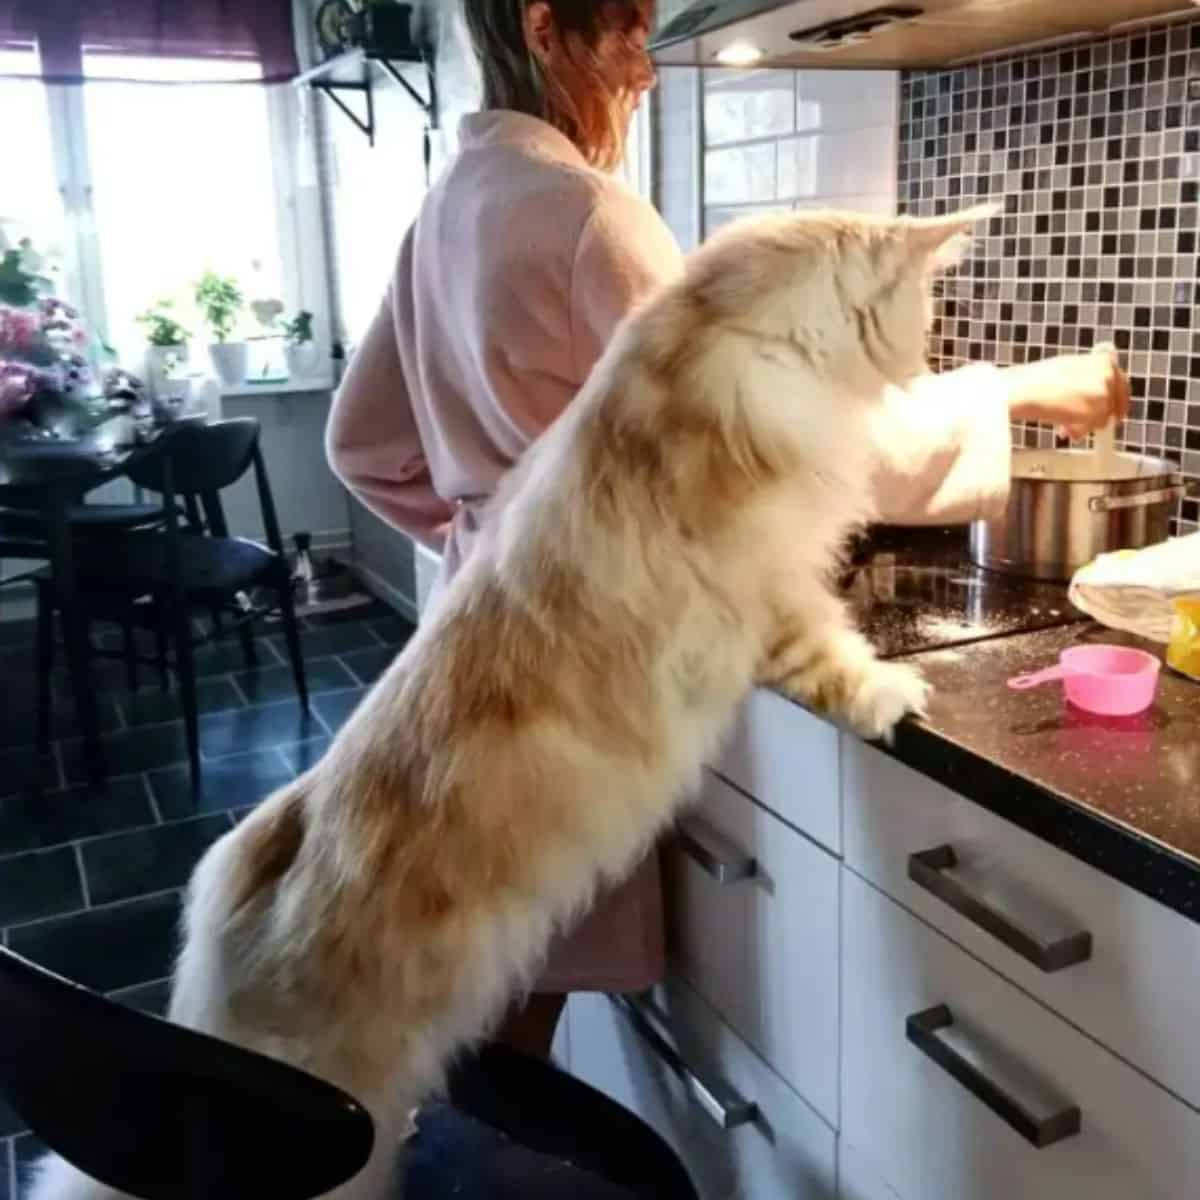 lotus the maine coon is able to reach the counter top